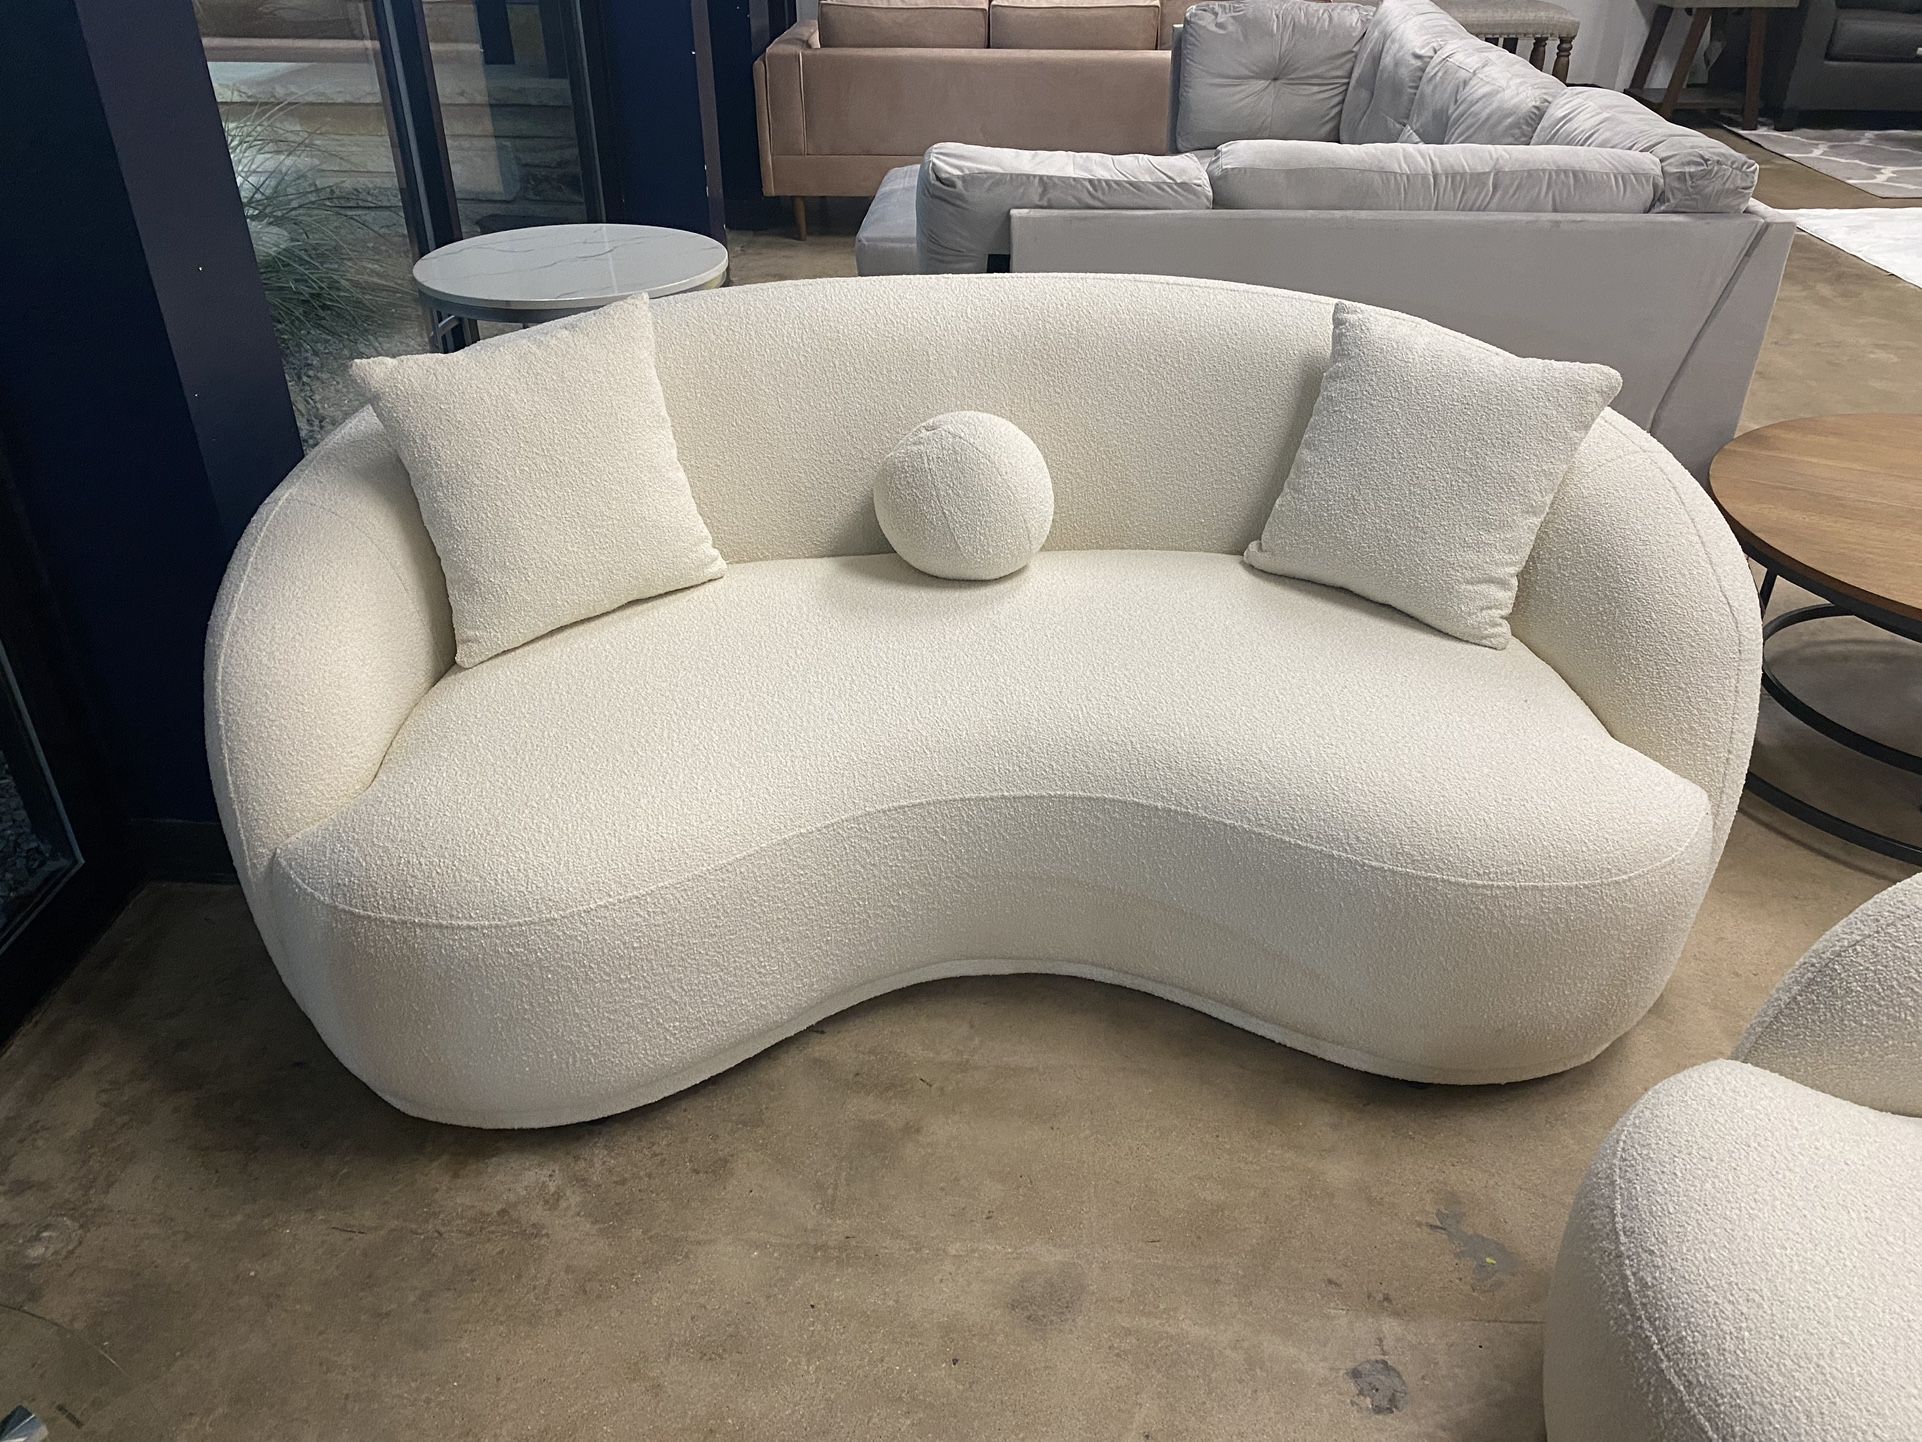 Sectional, Living Room, Loveseat,Sofa,Recliner, Accent Chair,Sleeper Sofa, Chaise Options